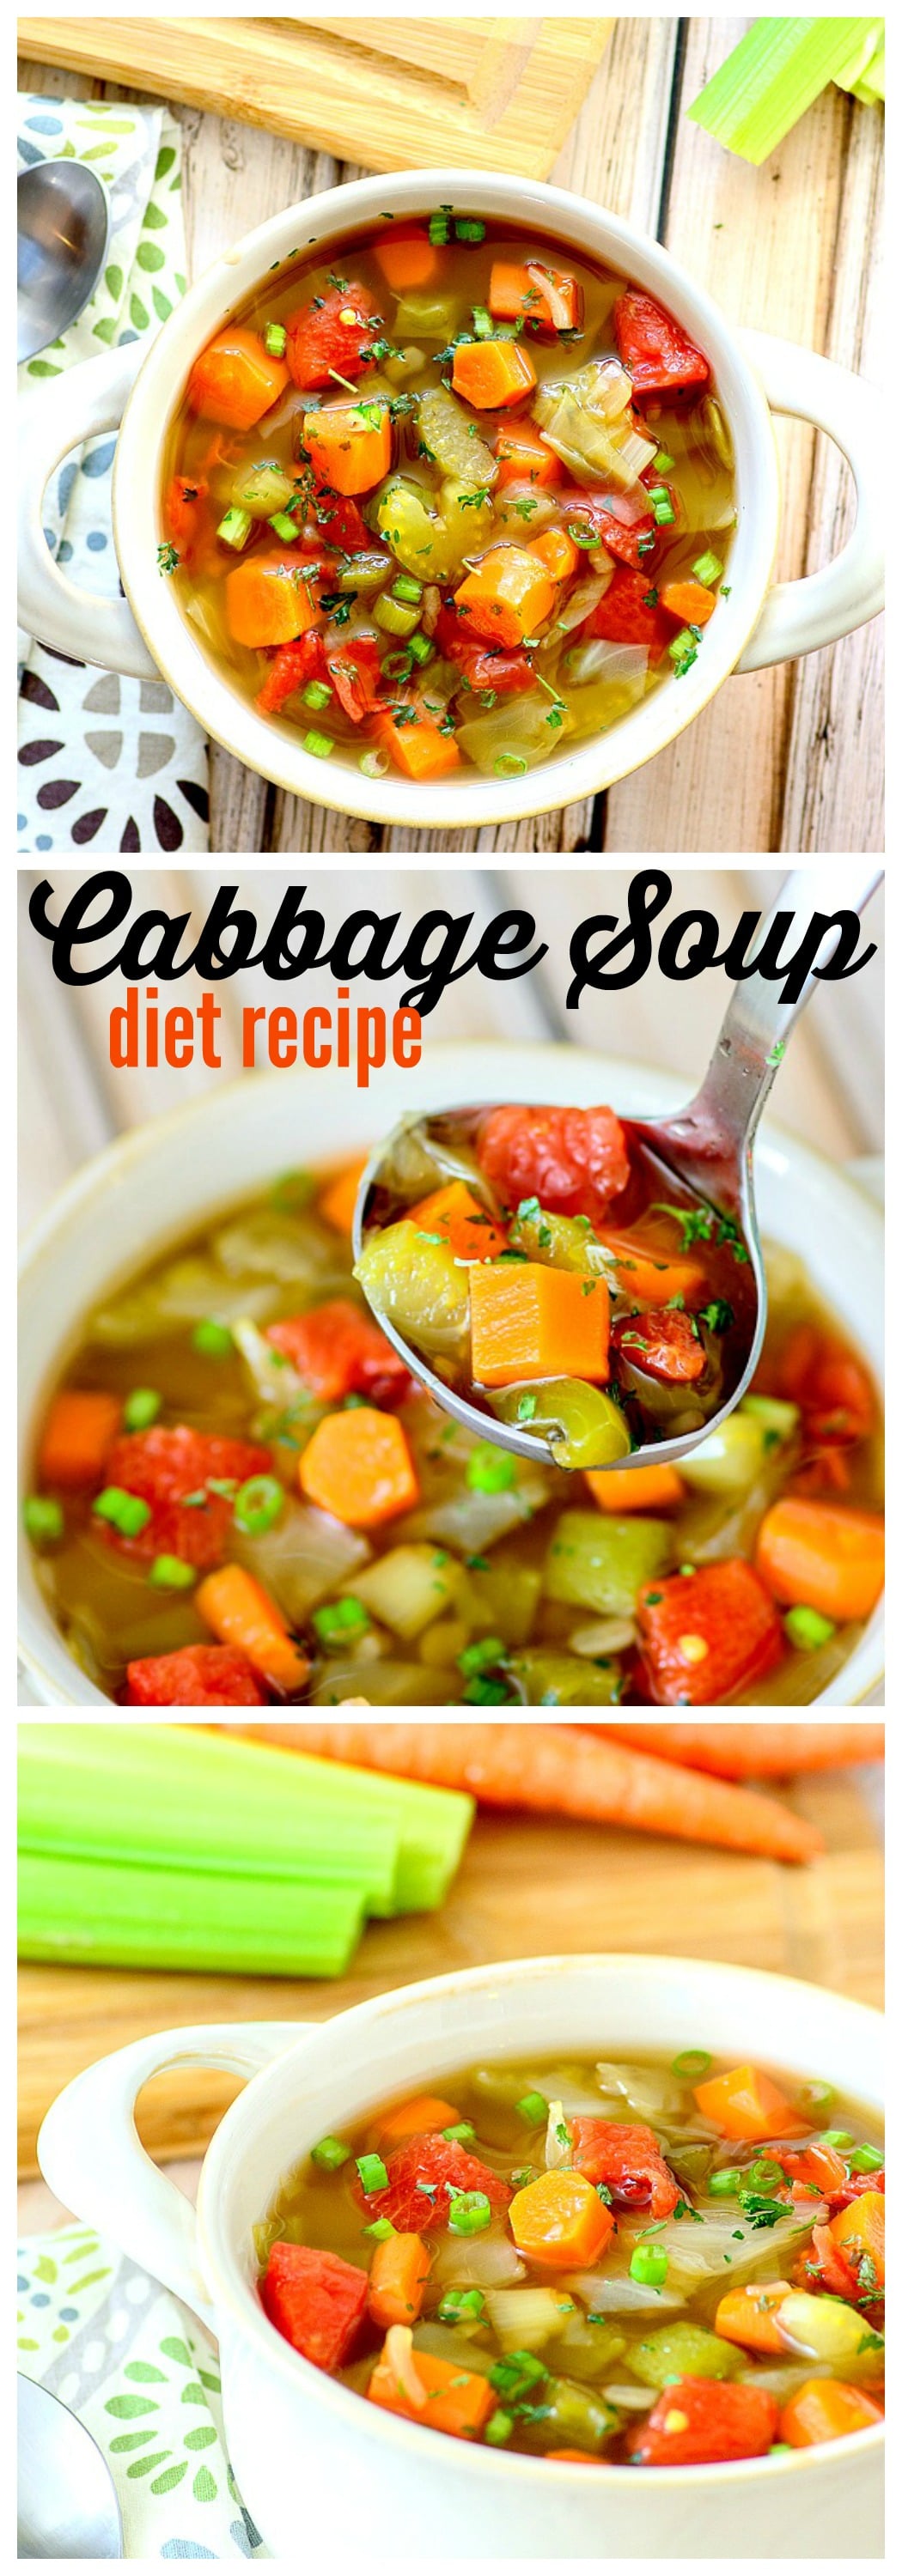 7 day cabbage soup diet recipe 3 0